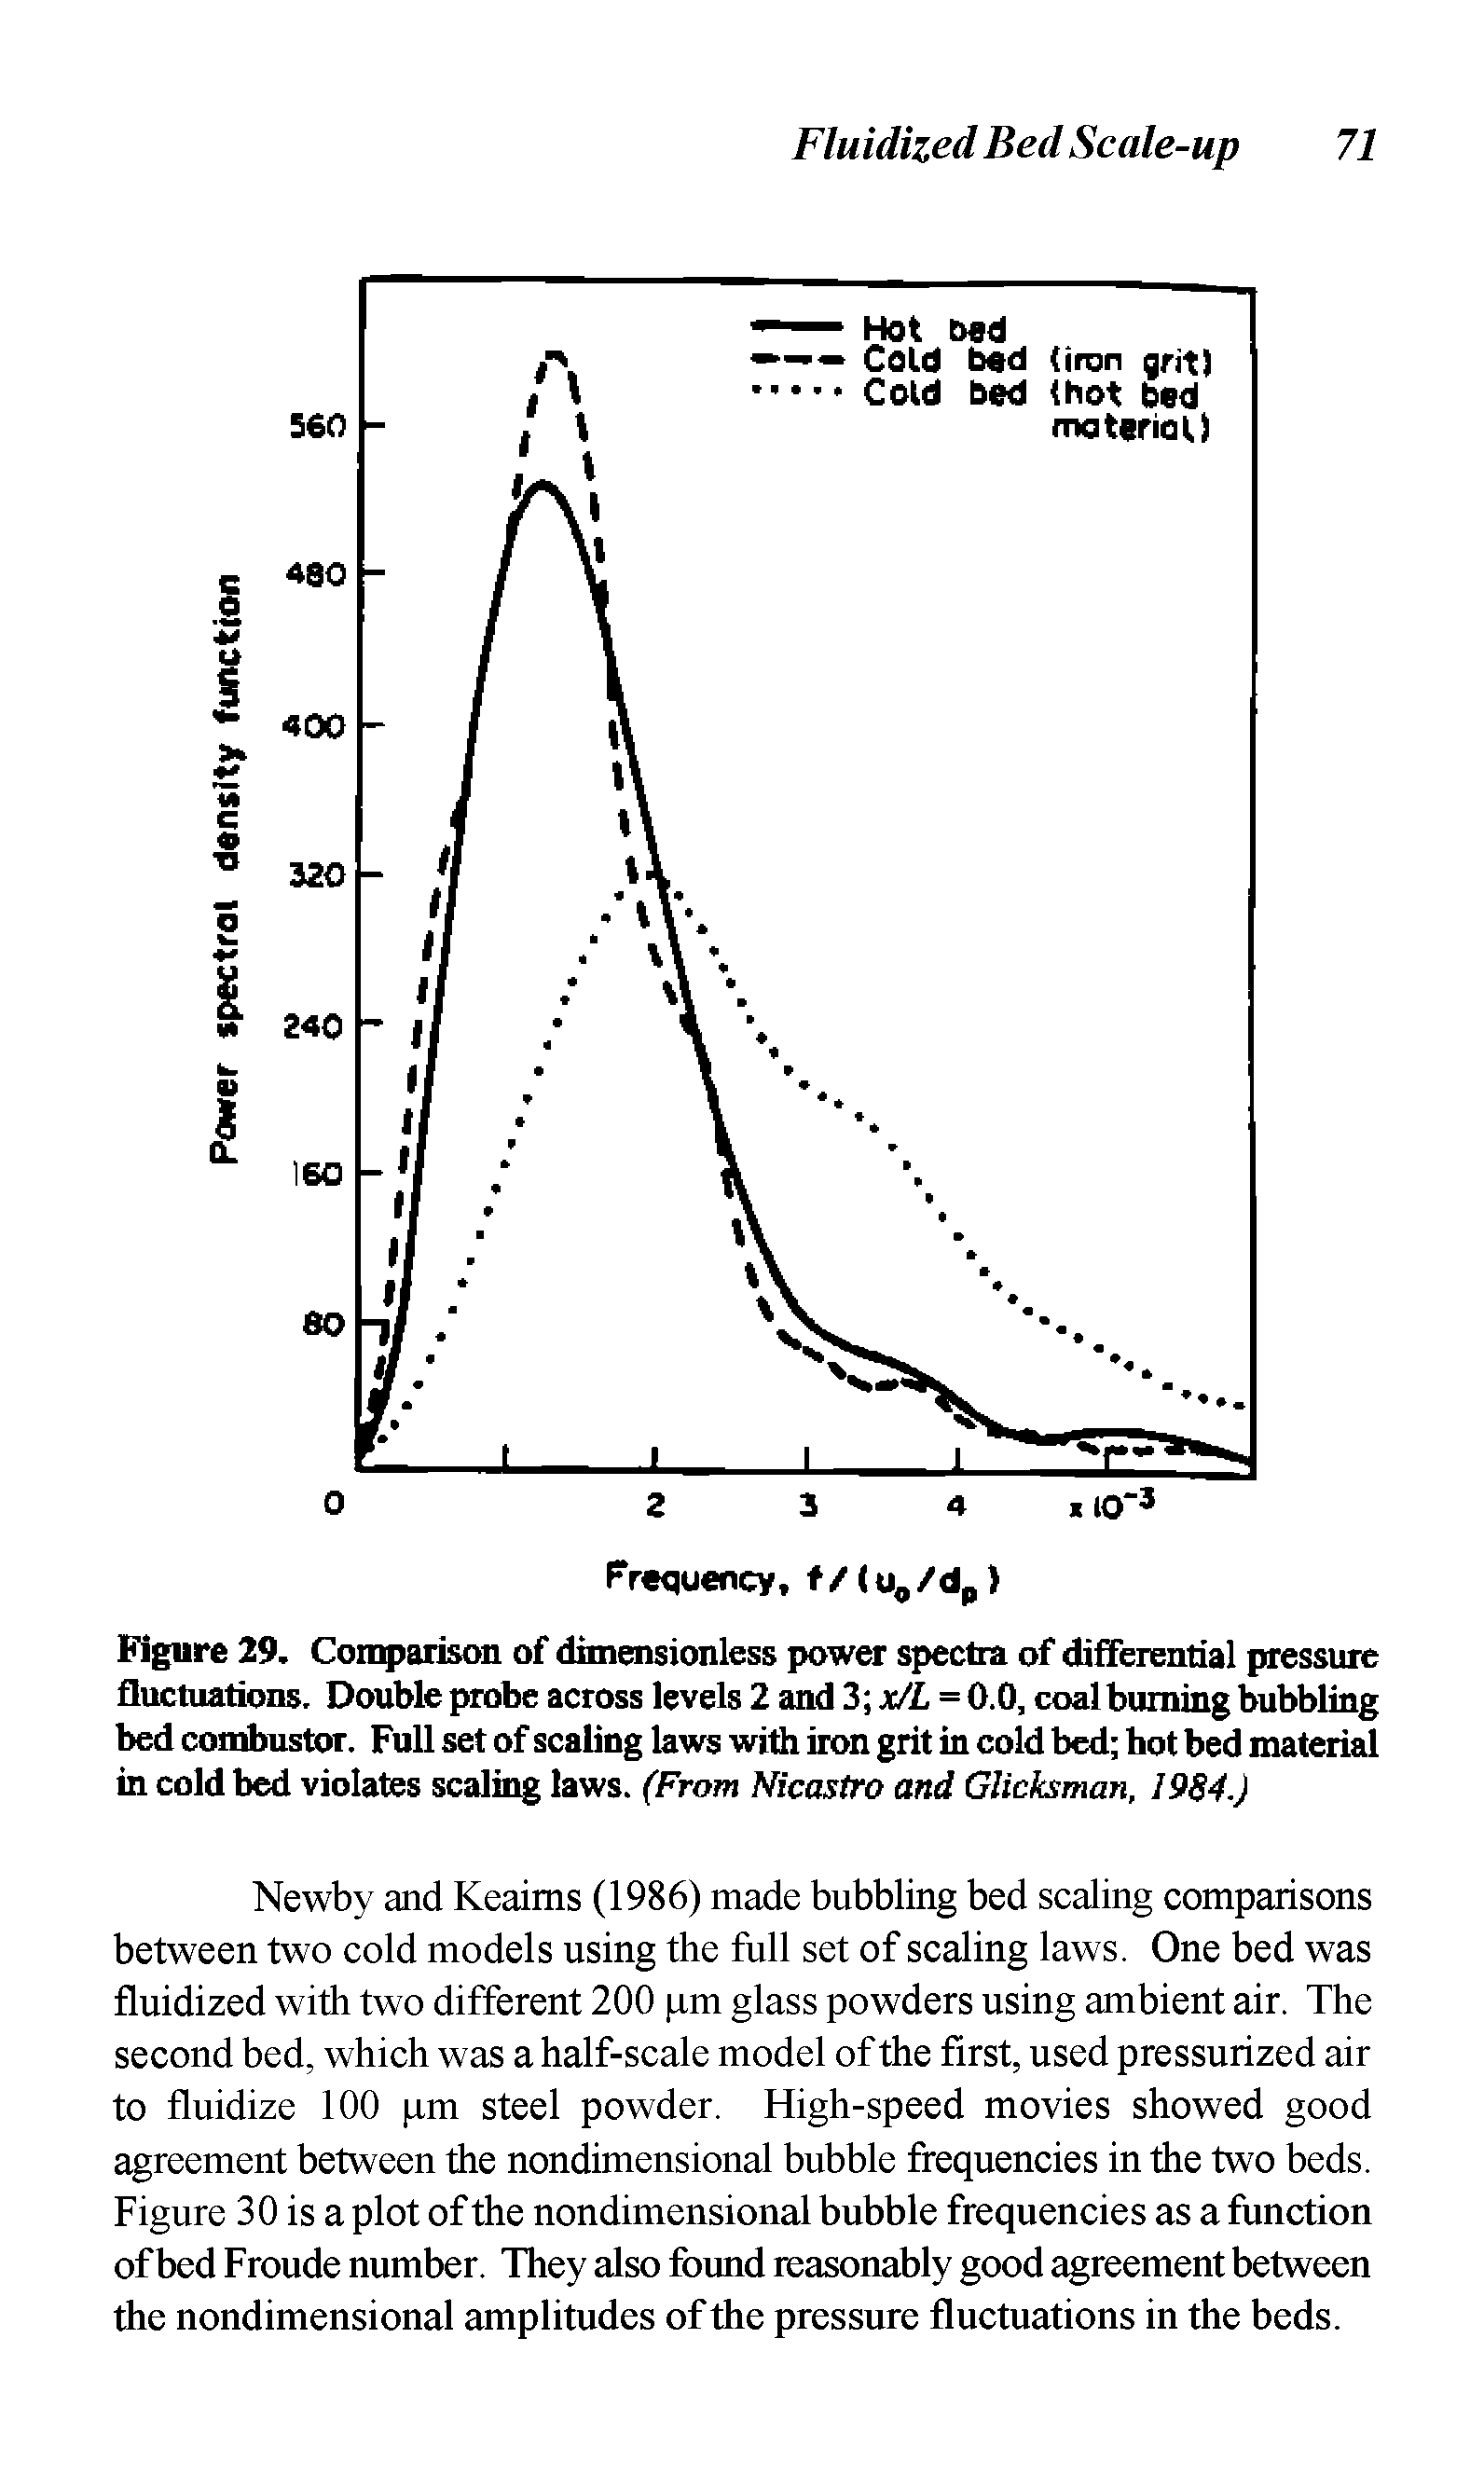 Figure 29. Comparison of dimensionless power spectra of differential pressure fluctuations. Double probe across levels 2 and 3 x/L = 0.0, coal burning bubbling bed combustor. Full set of scaling laws with iron grit in cold bed hot bed material in cold bed violates scaling laws. (From Nicastro and Glicksman, 1984.)...